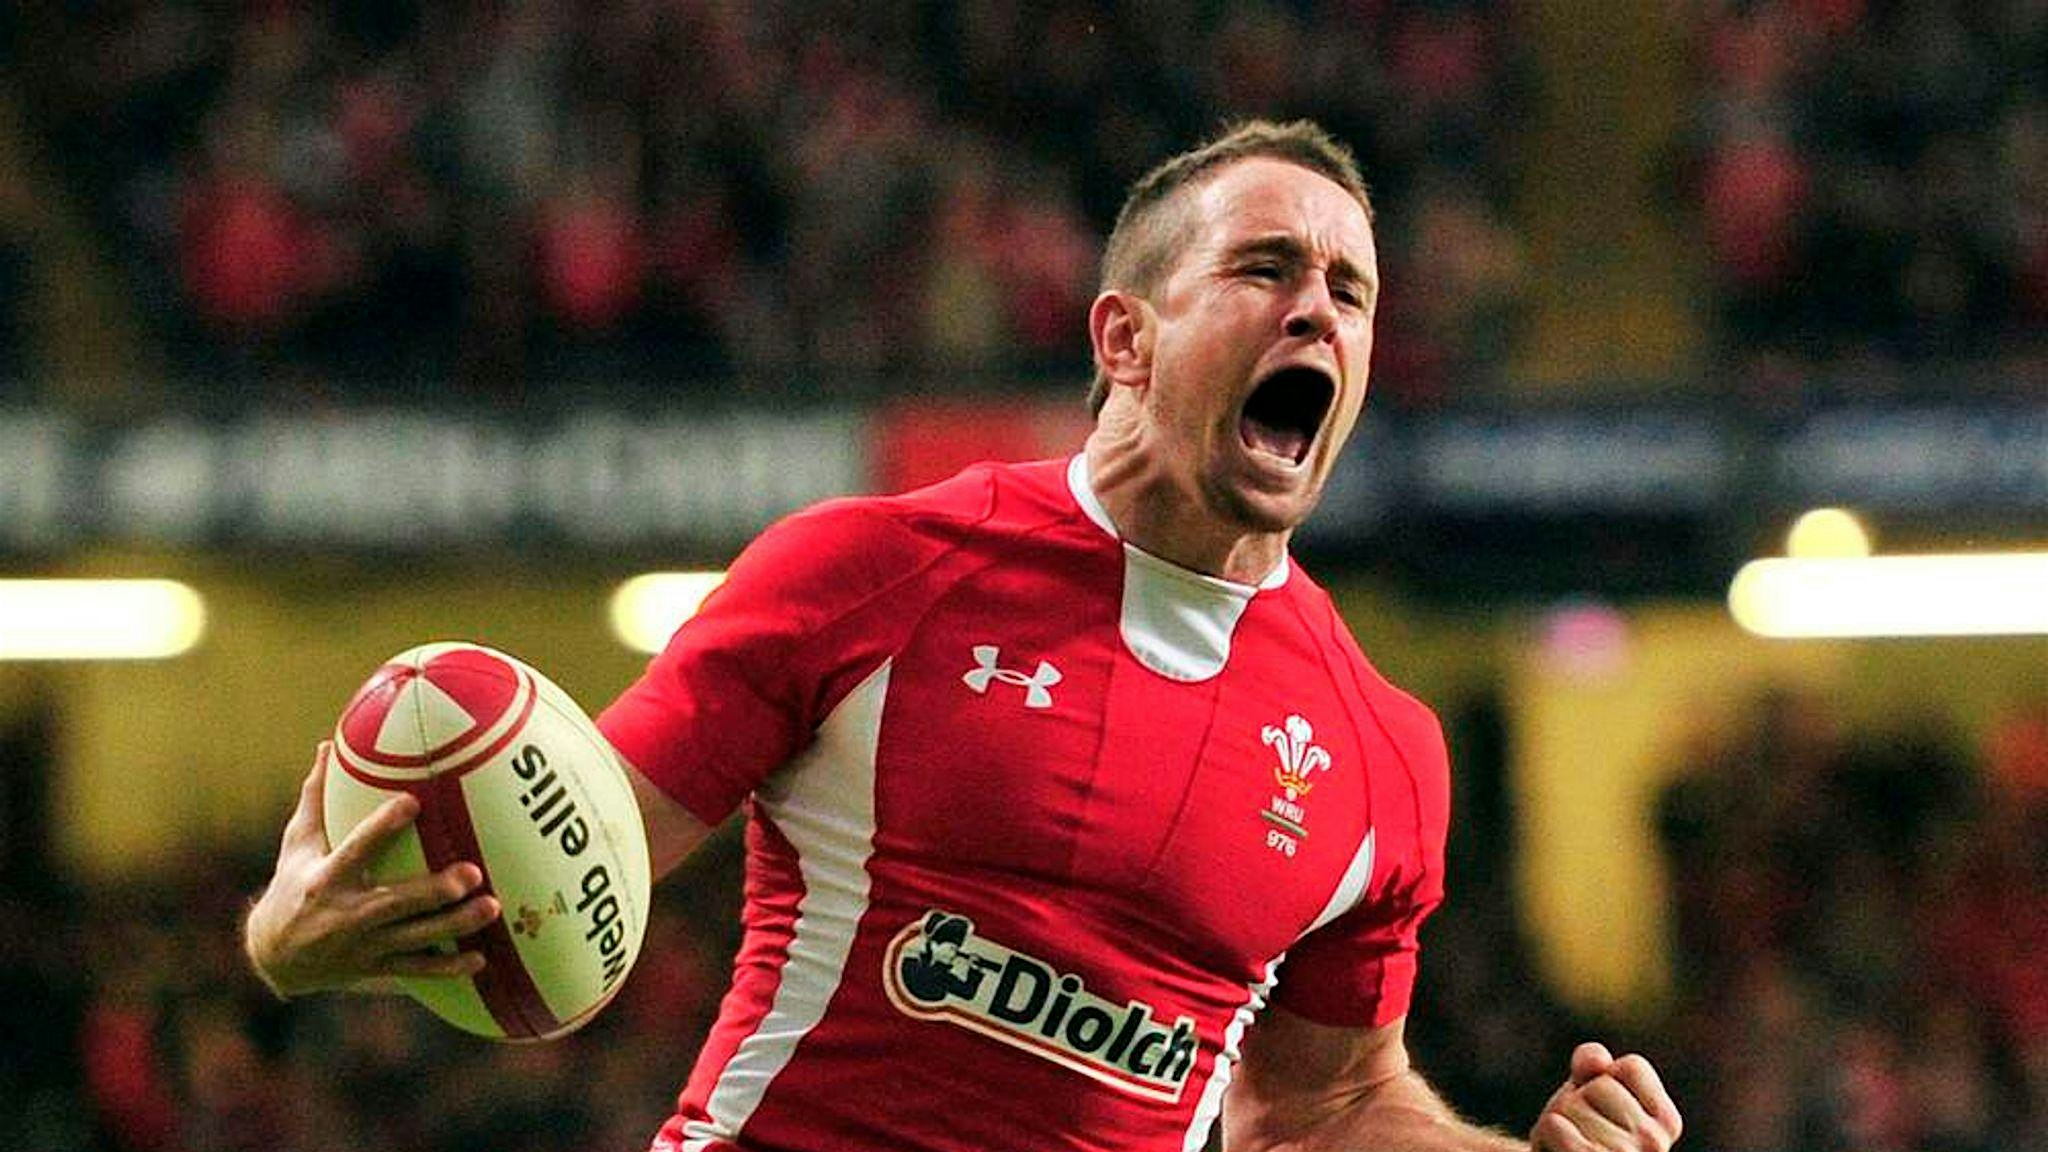 An evening with Shane Williams